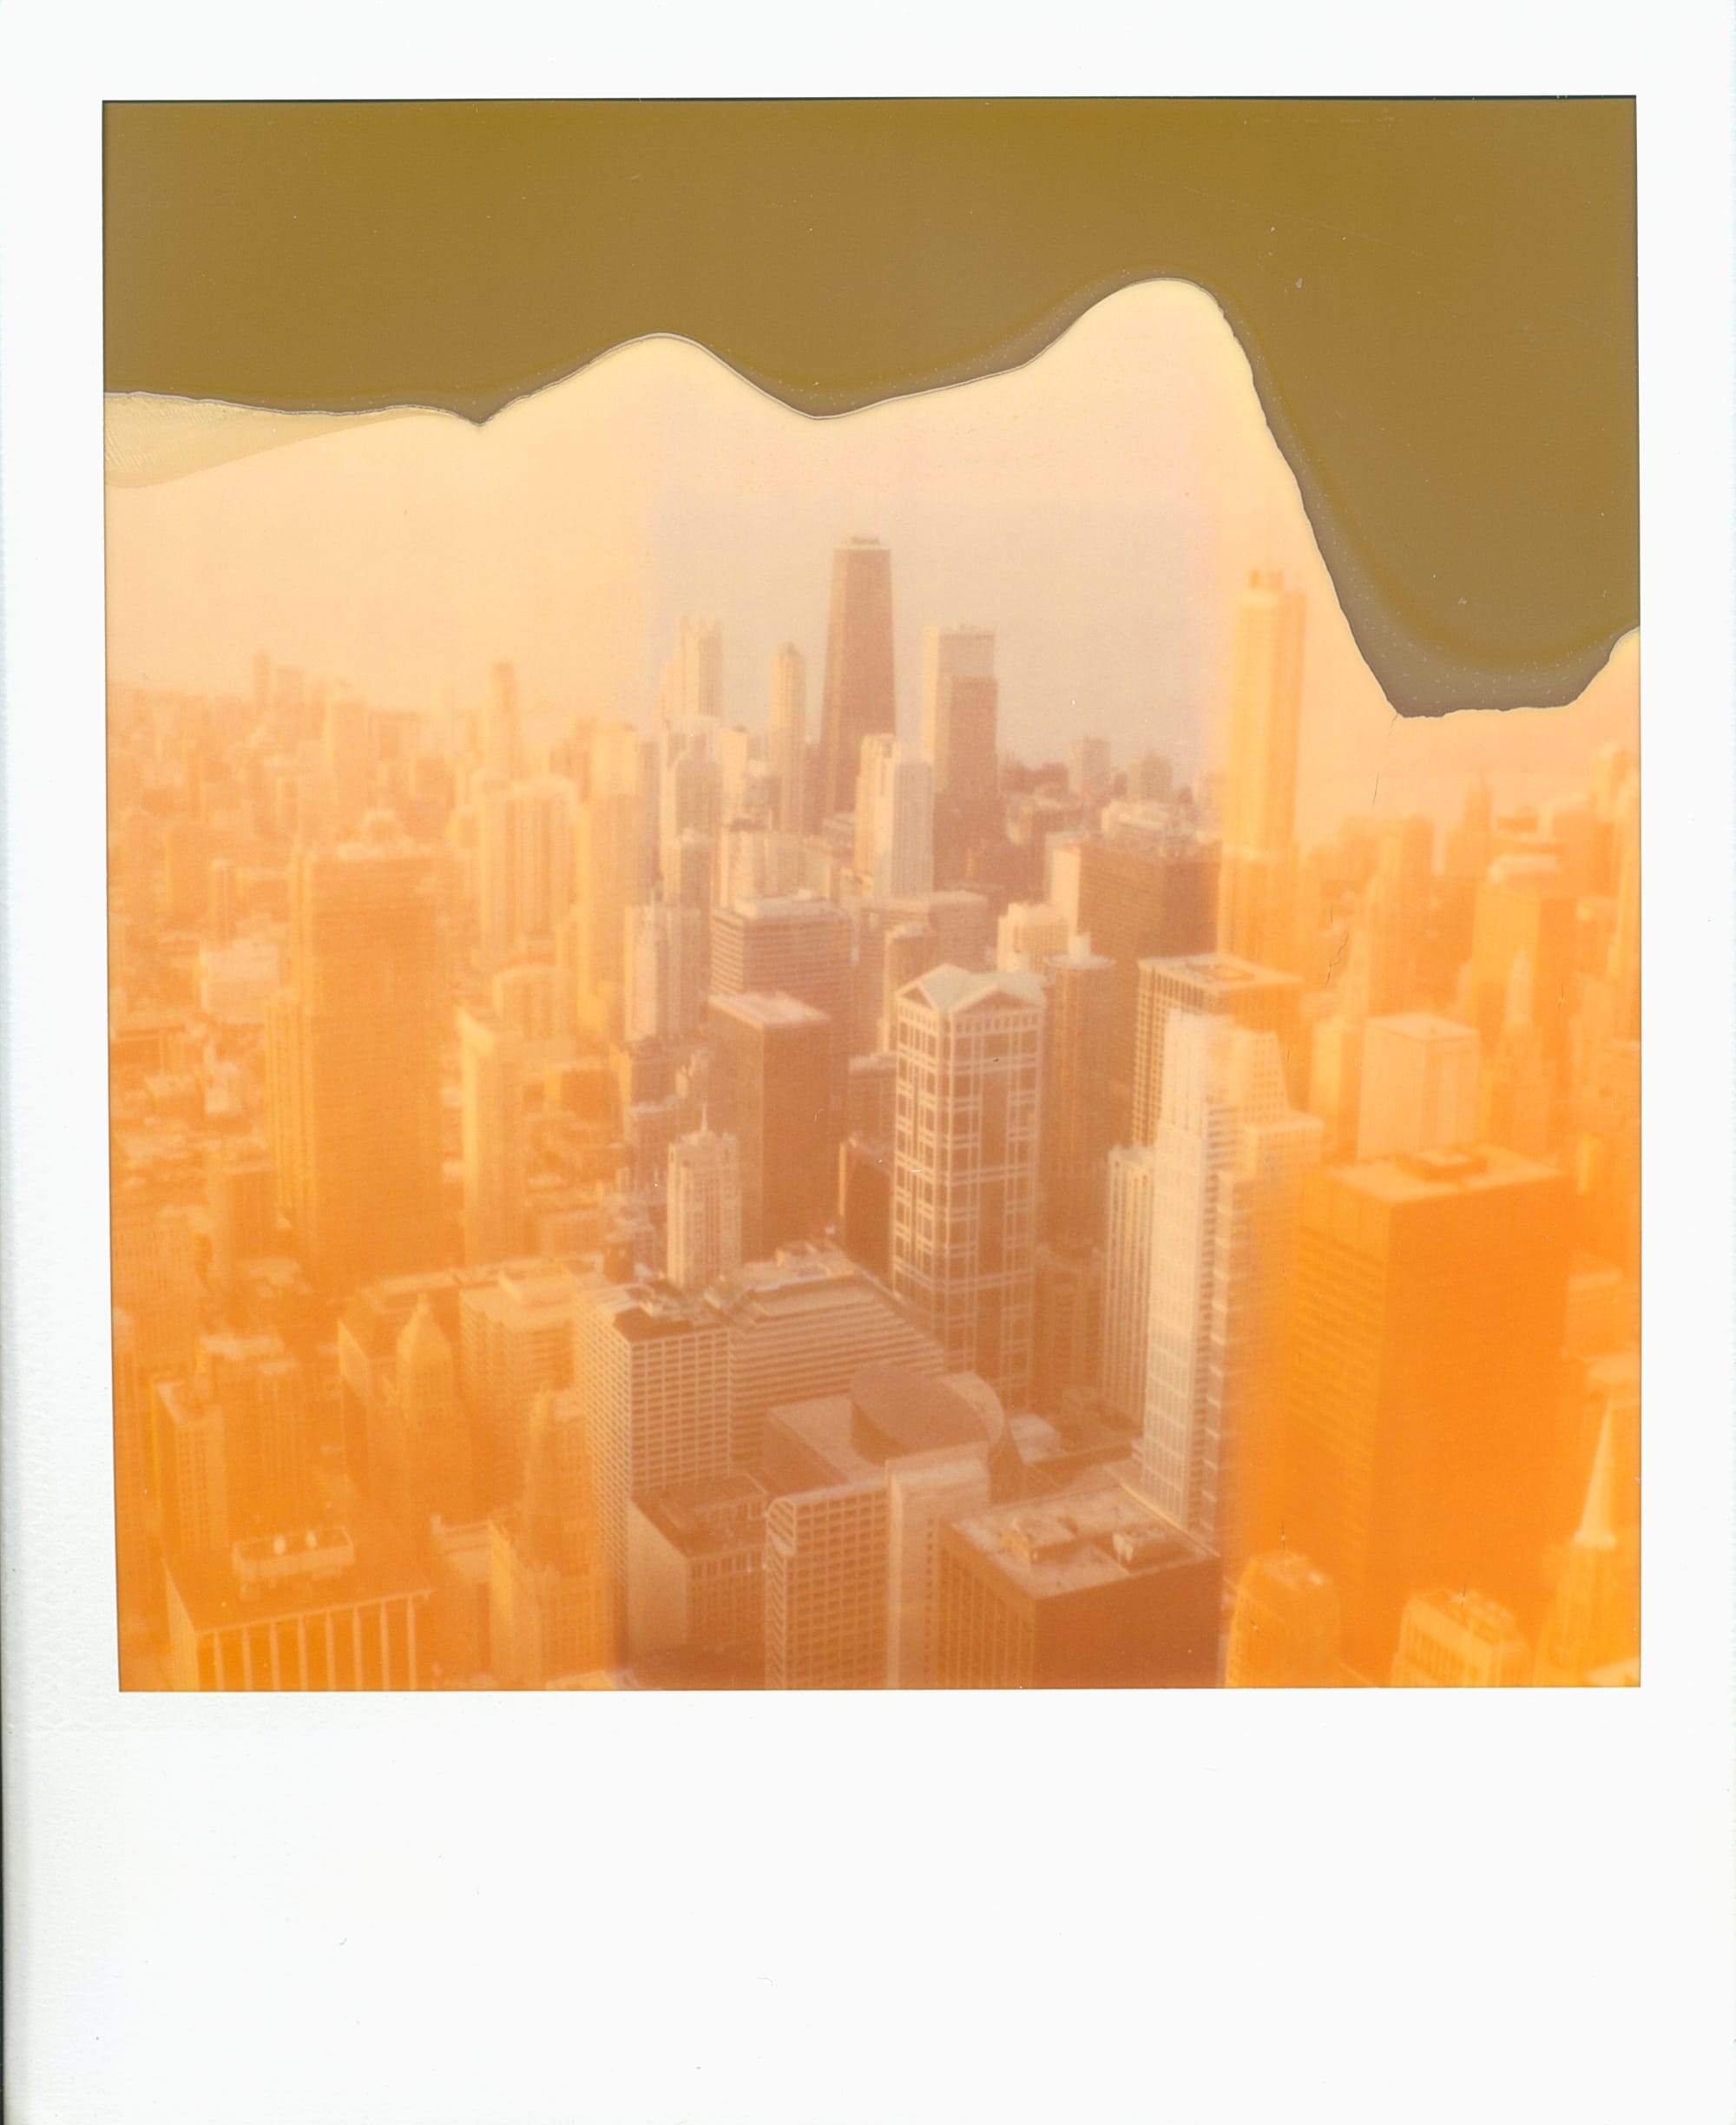 Scan of expired Polaroid film image of the Chicago skyscrapers as seen from the top of the Sears Tower. The image has strongly orange areas on the left and right, and a very desaturated exposure down the middle. The top of the image isn't fully developed, leaving an irregular edge of gray plastic where the sky would be.